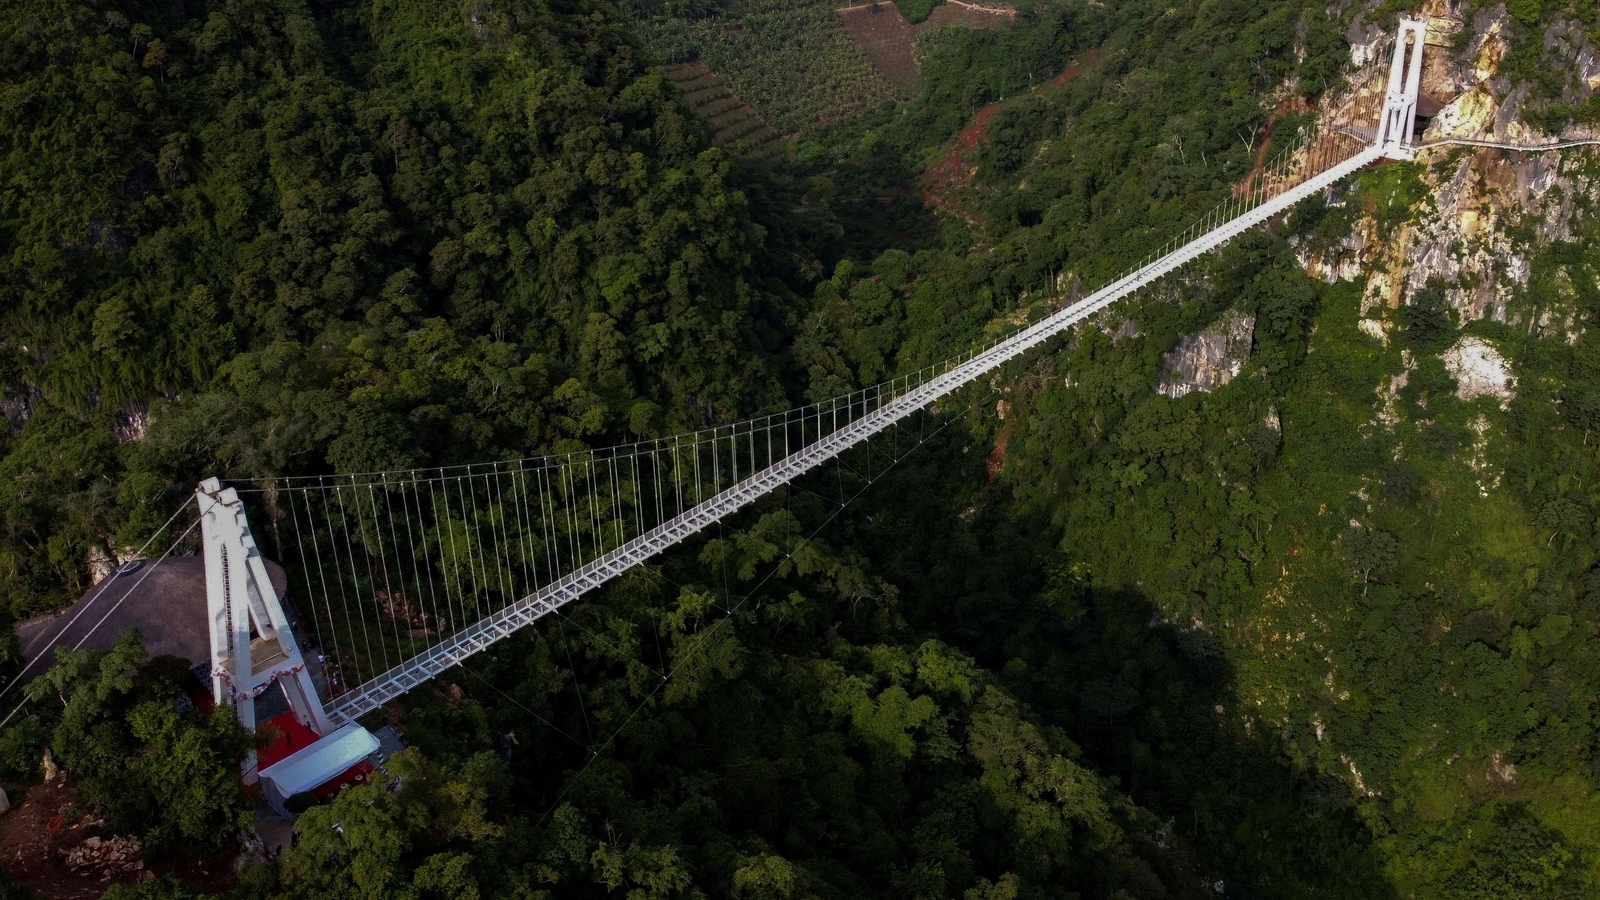 'Don't look down': Vietnam's glass-bottomed bridge, the Bach Long, attracts thrill-seeking tourists